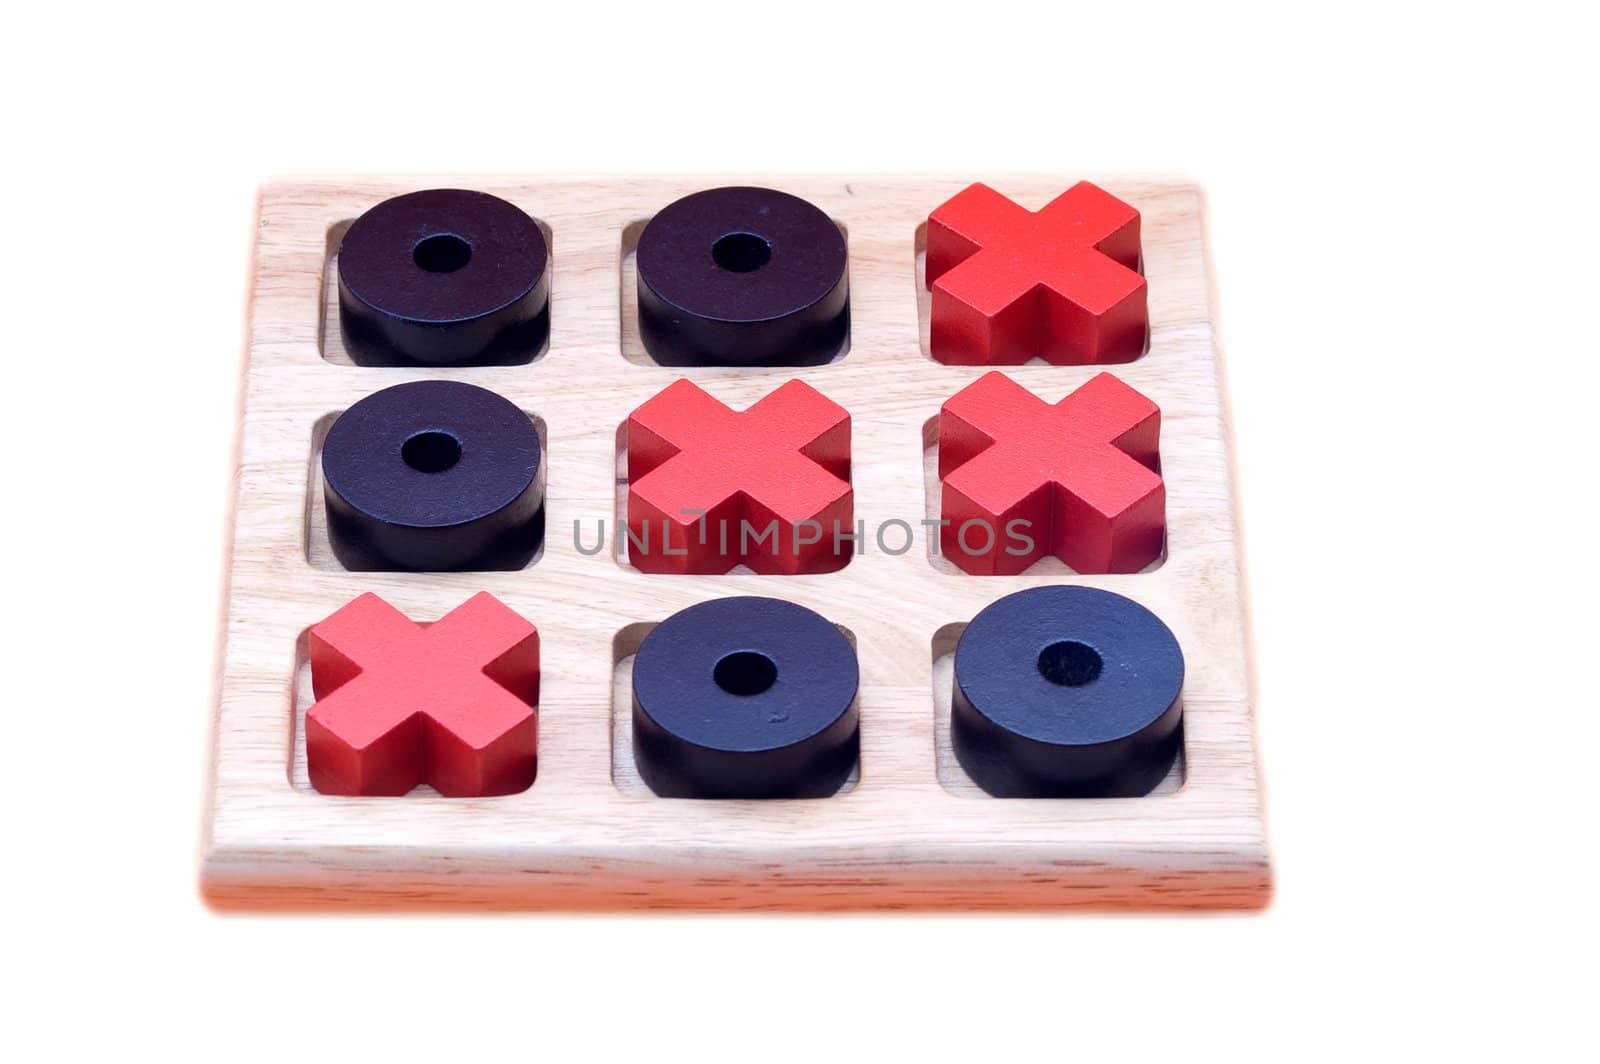 Tic-Tac-Toe game board on a white background.